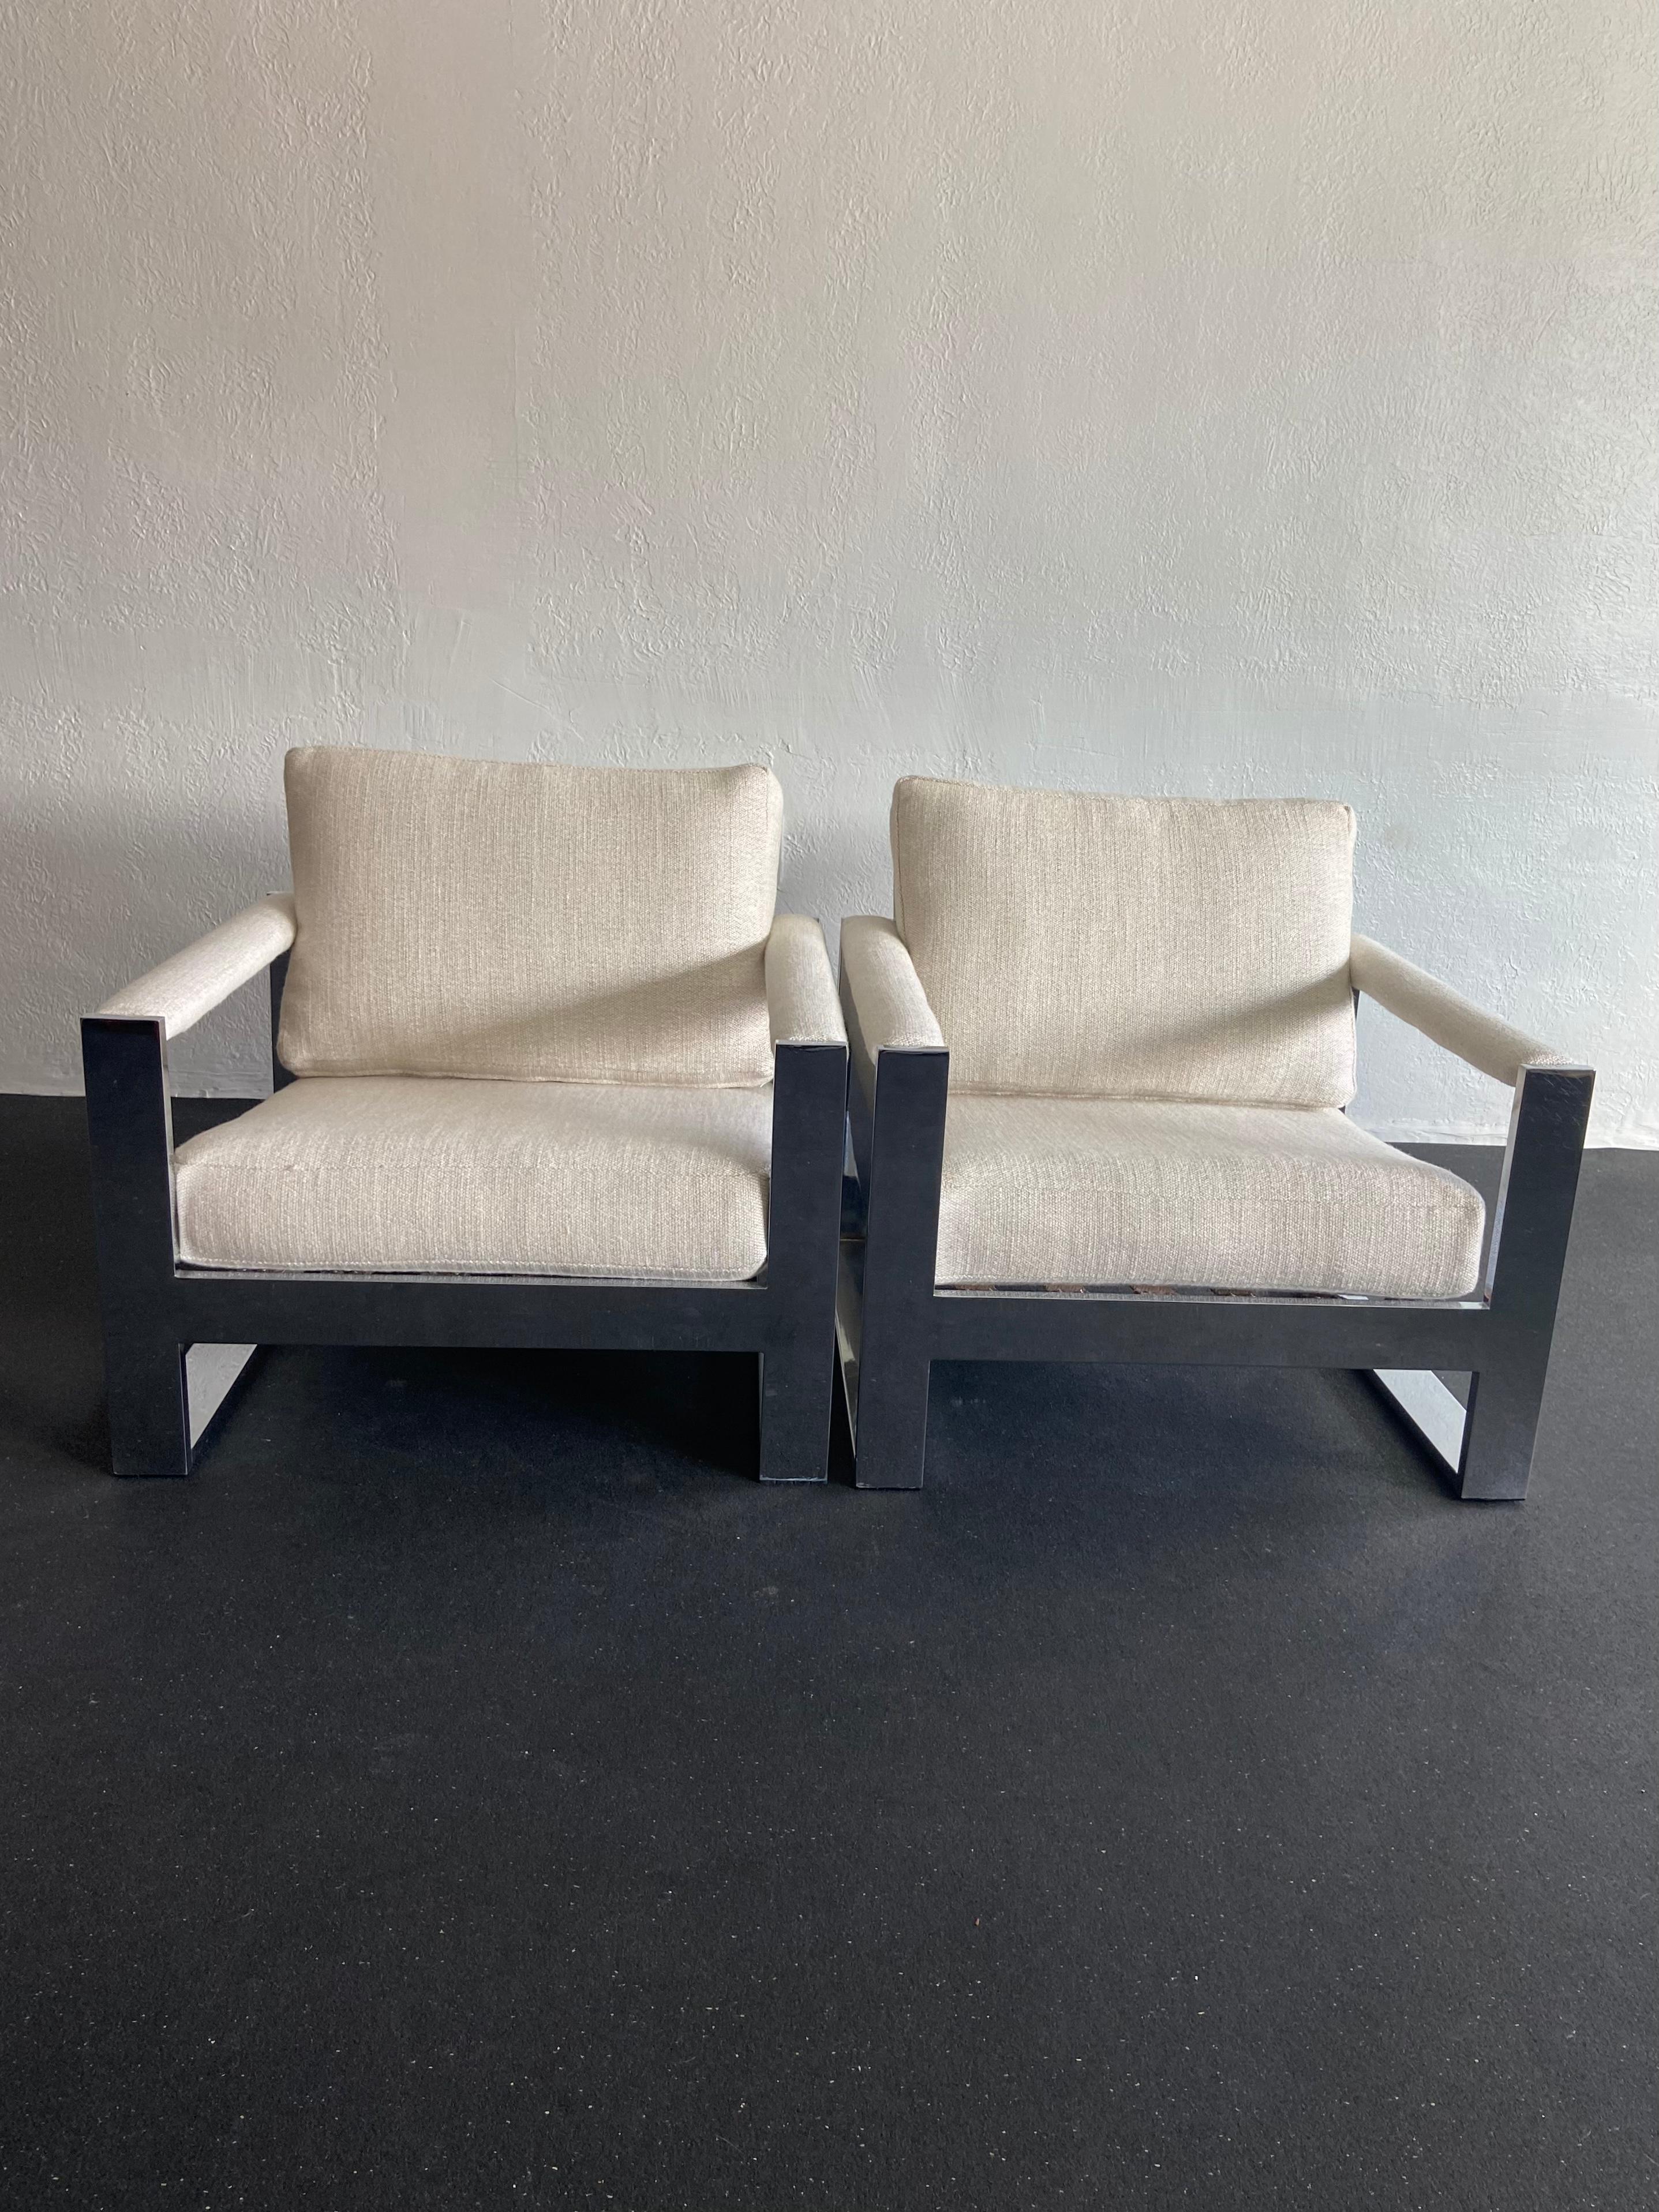 Mid-Century Modern Milo Baughman for Thayer Coggin Chrome Lounge Chairs - a Pair For Sale